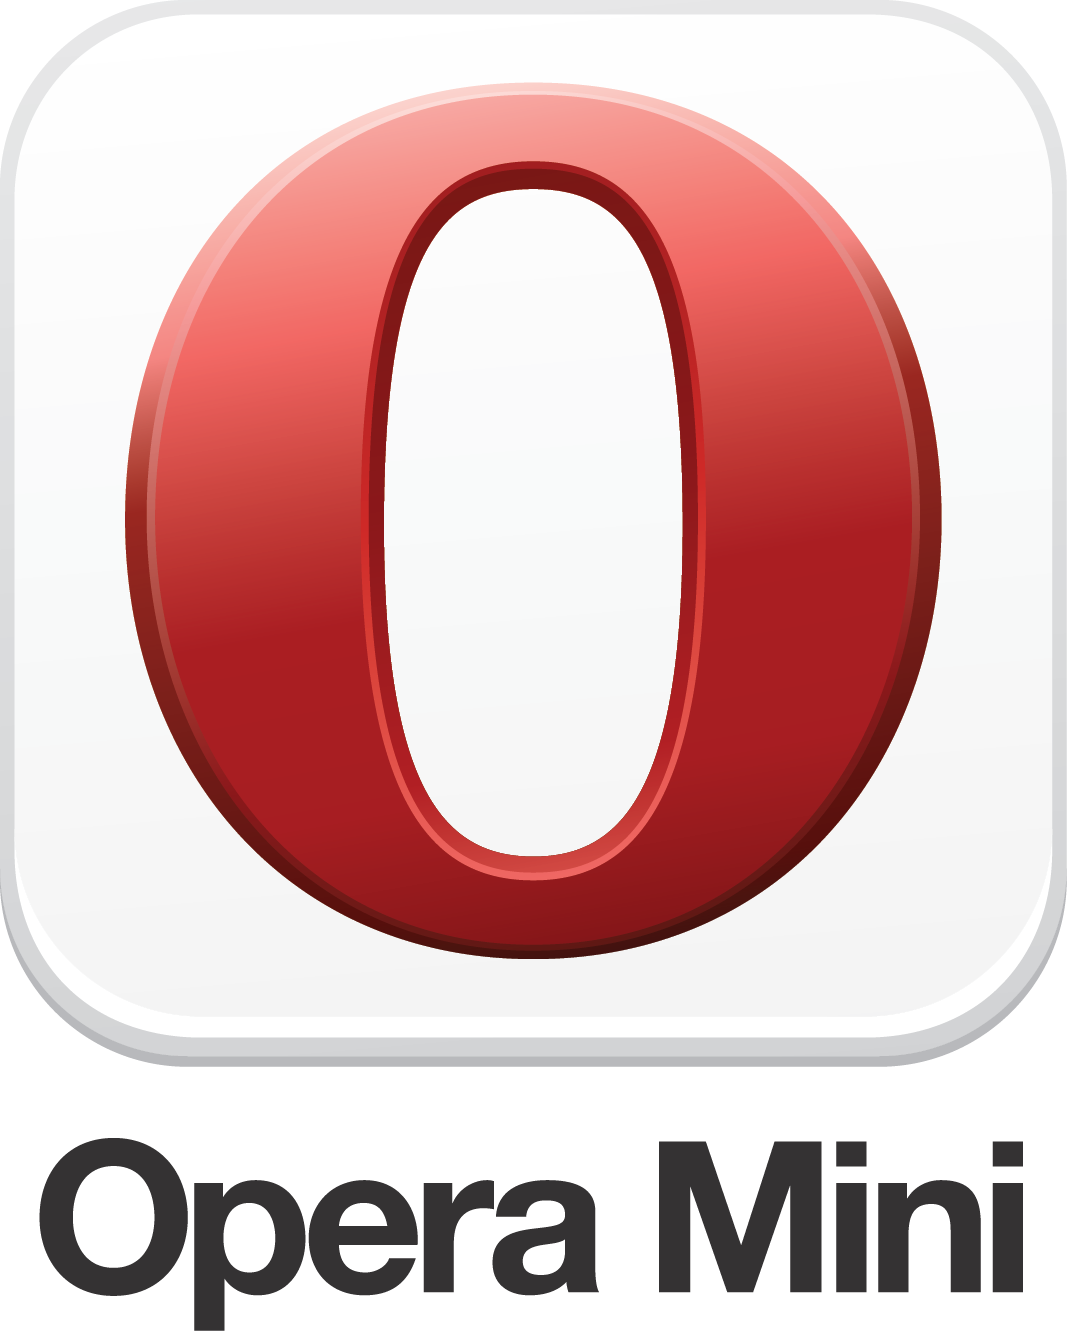 Opera Mini 7.5.3.apk for android free download - Download ...